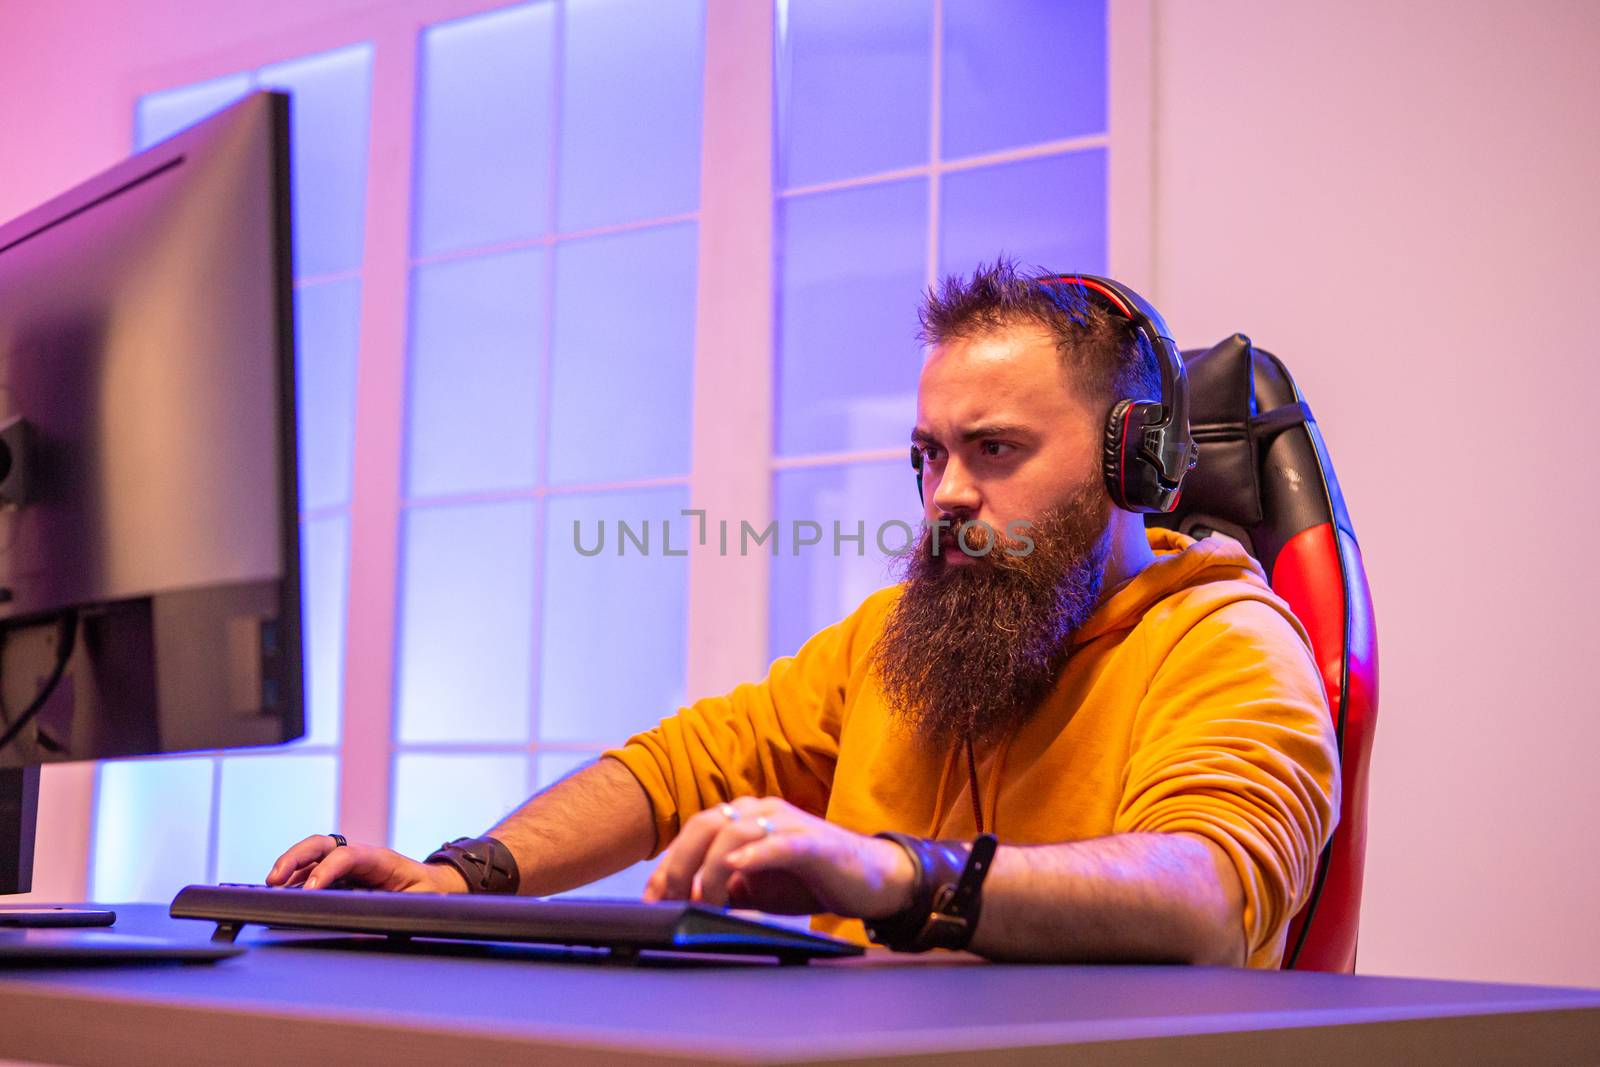 Professional gamer with long beard in front of powerful gaming rig by DCStudio